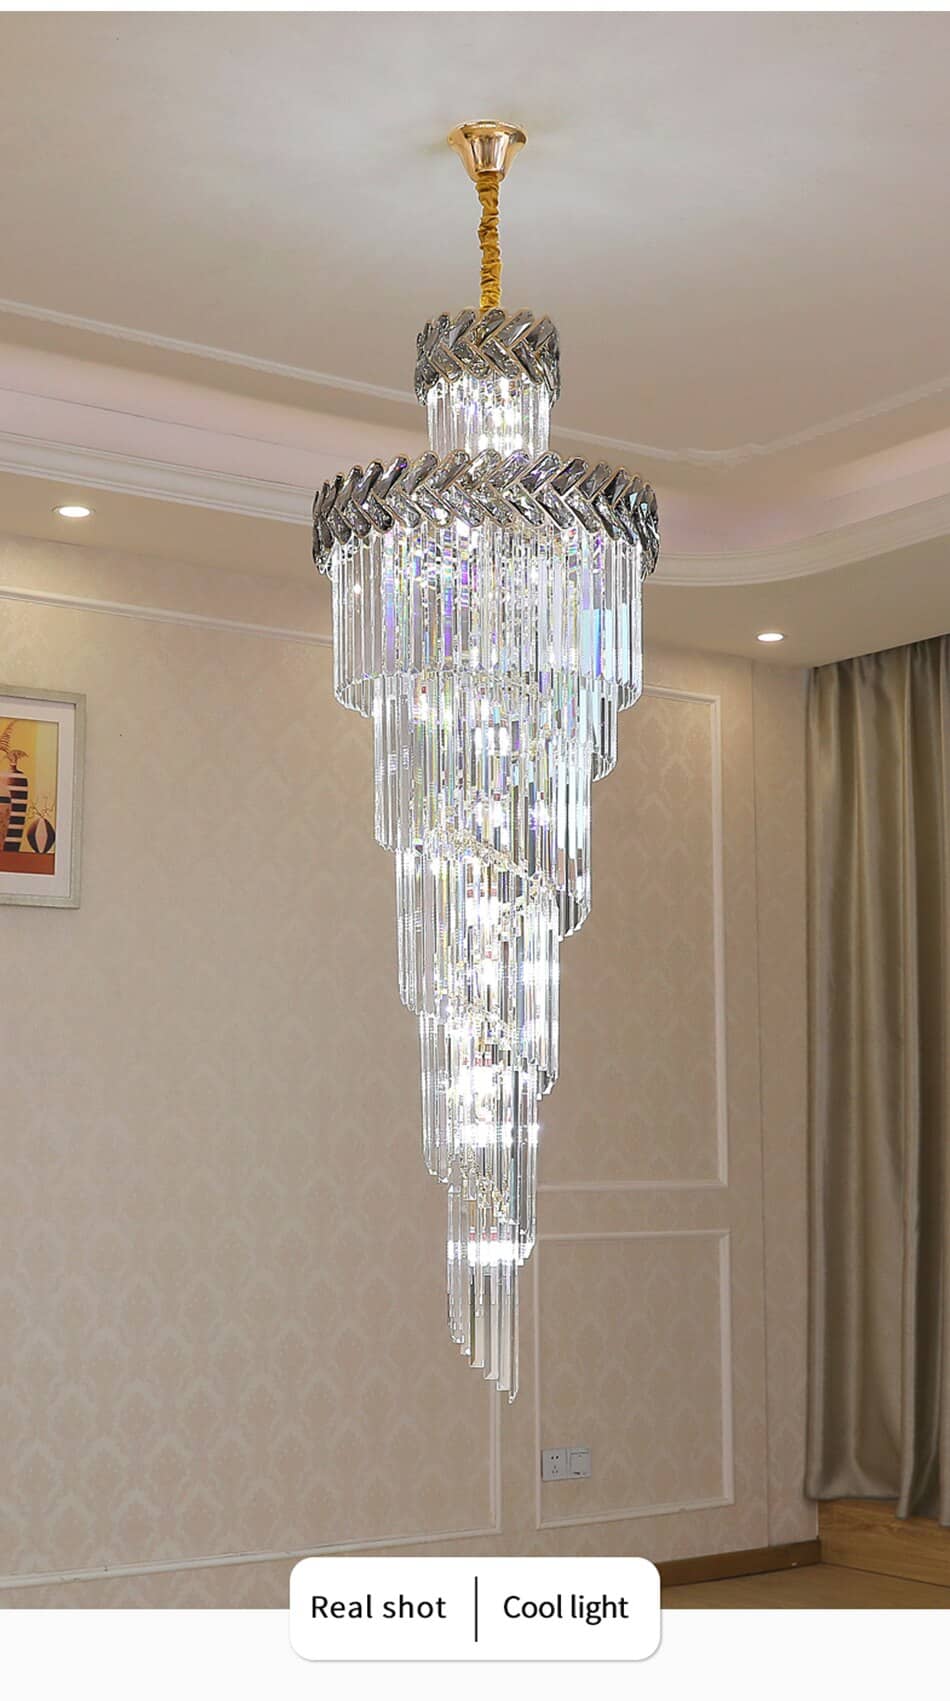 Chandelier in the Hall Living Room Top Long Smoky Gray Crystal Lamps Gold Staircase Lighting Illuminator